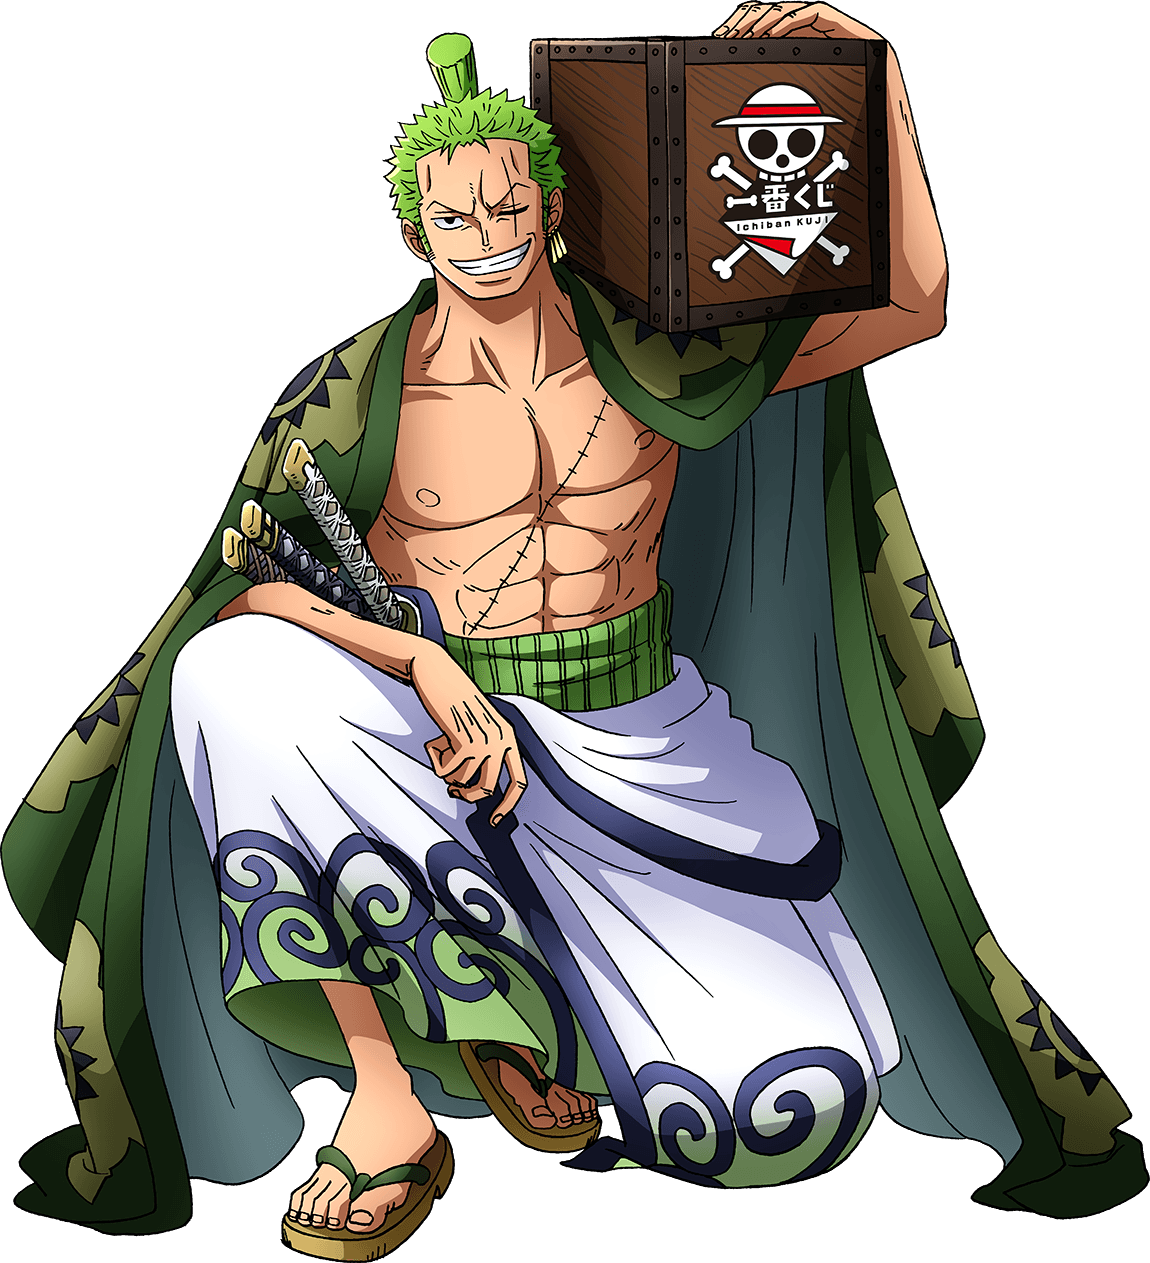 One Piece Zoro Png Hd - Zoro One Piece Png, png, transparent png